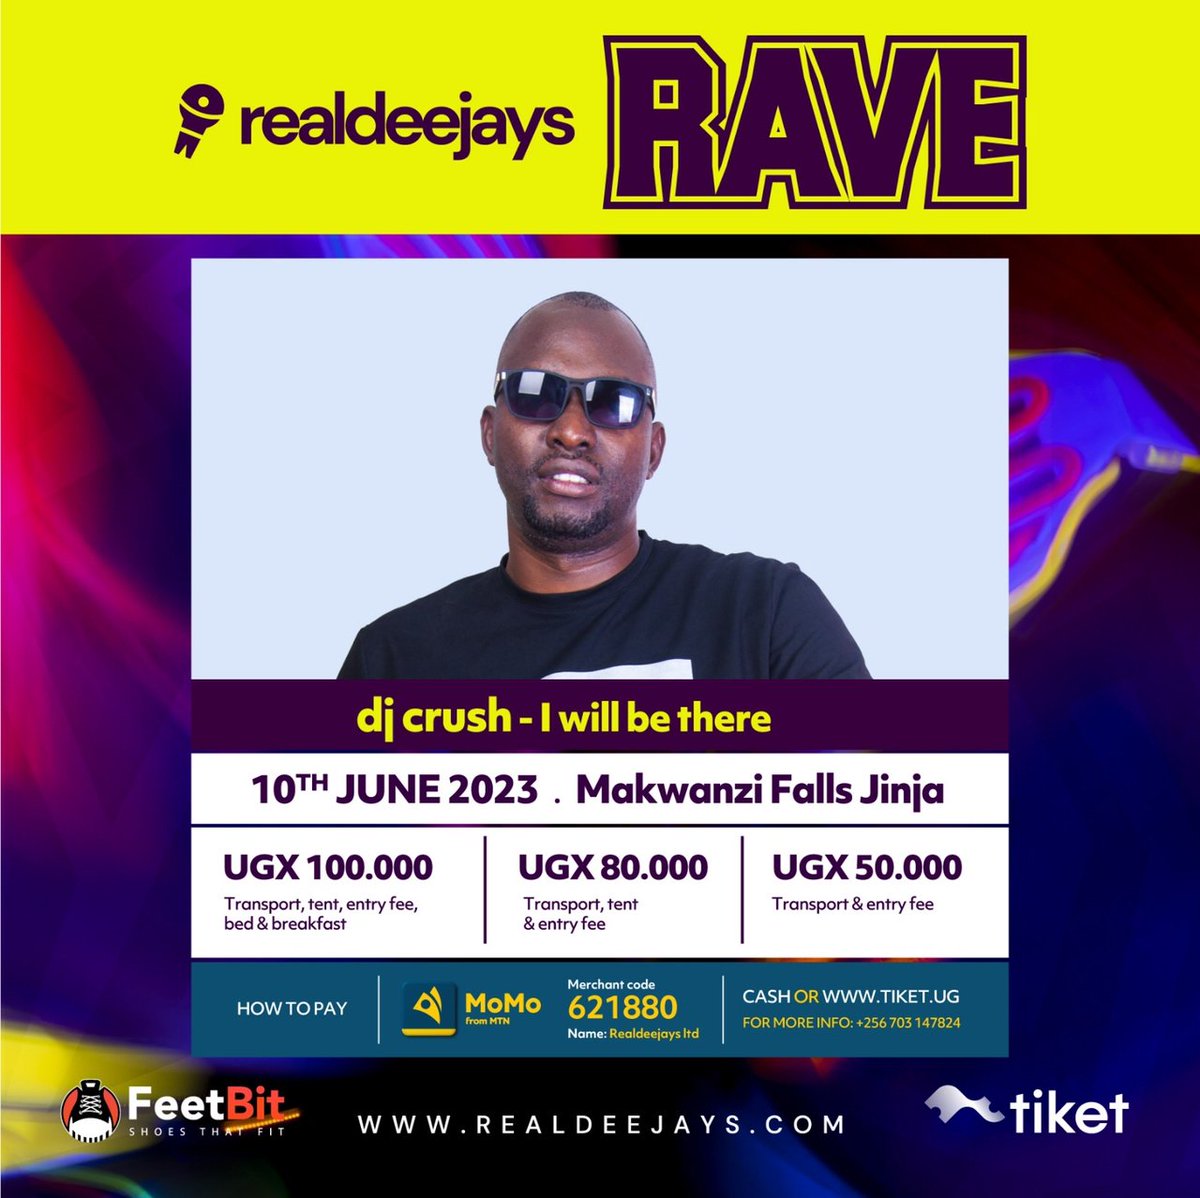 Makwanzi Falls, Jinja has jaw dropping scenes man. 

Join us for 
 an unforgettable experience with
@Exclusivedjsug

For the Real Deejays and Exclusive Deejays Rave on 10th June! 🎉 🔥💃

#RealDjsRave 
#JinjaParty
#ExclusiveDjsUg